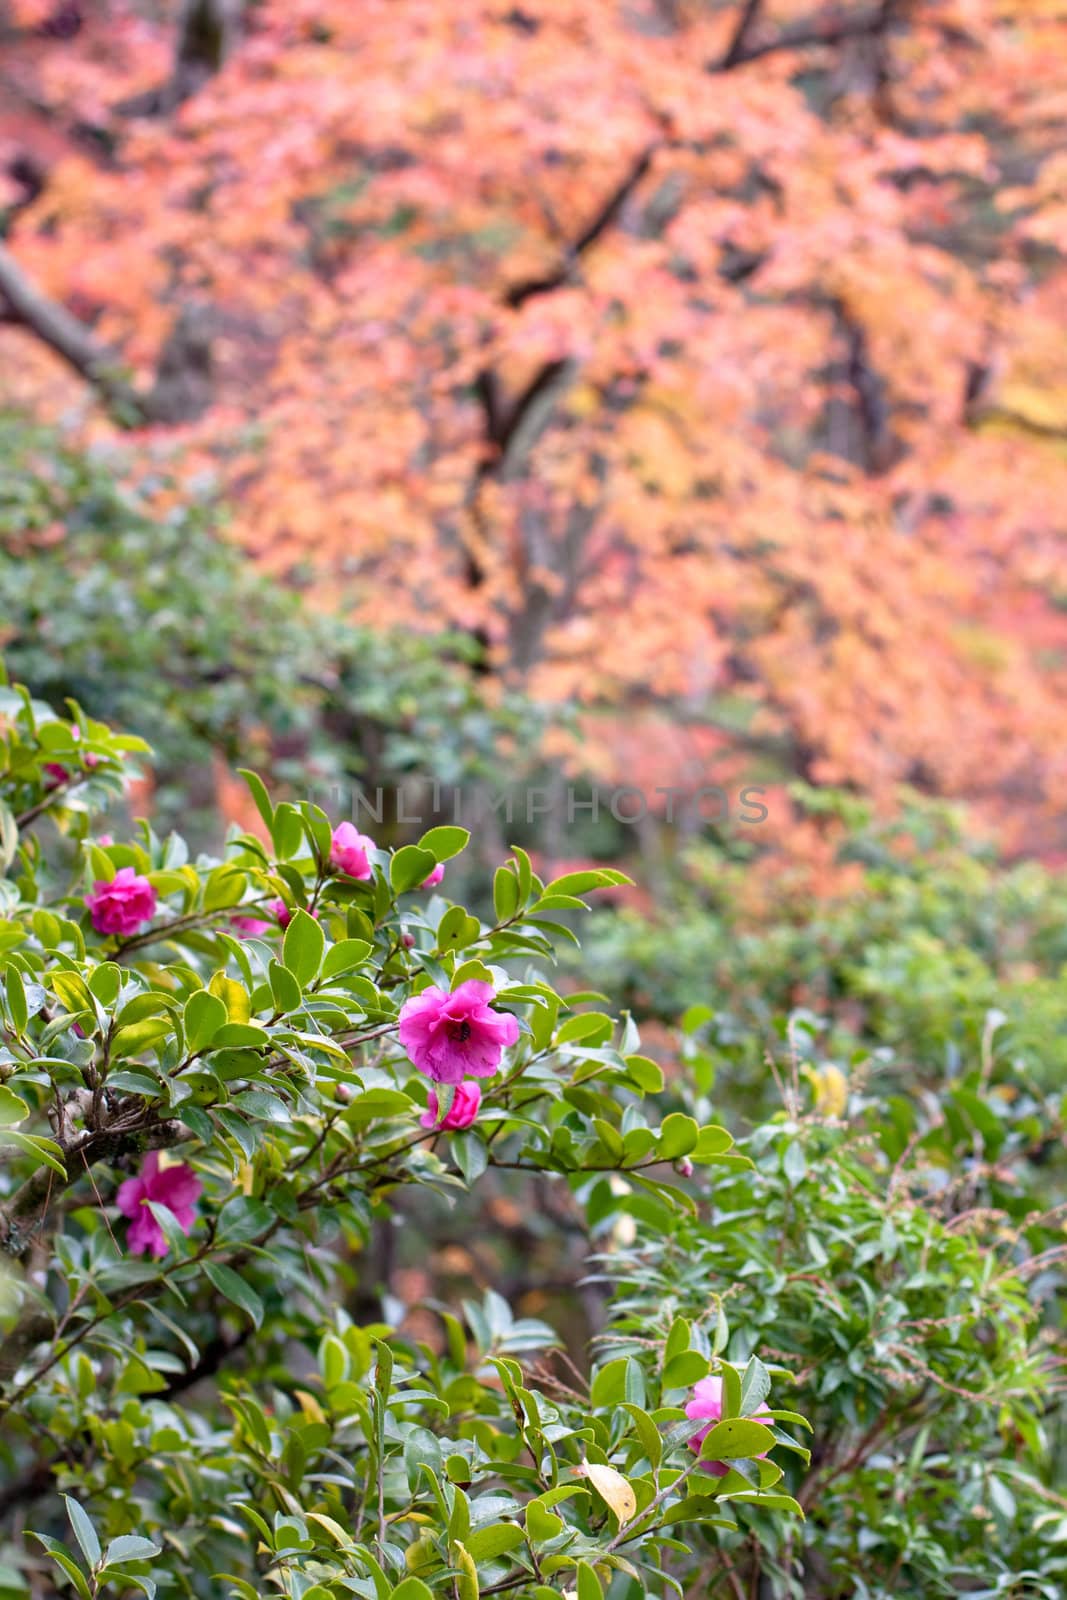 Several pink roses in an autumn garden
